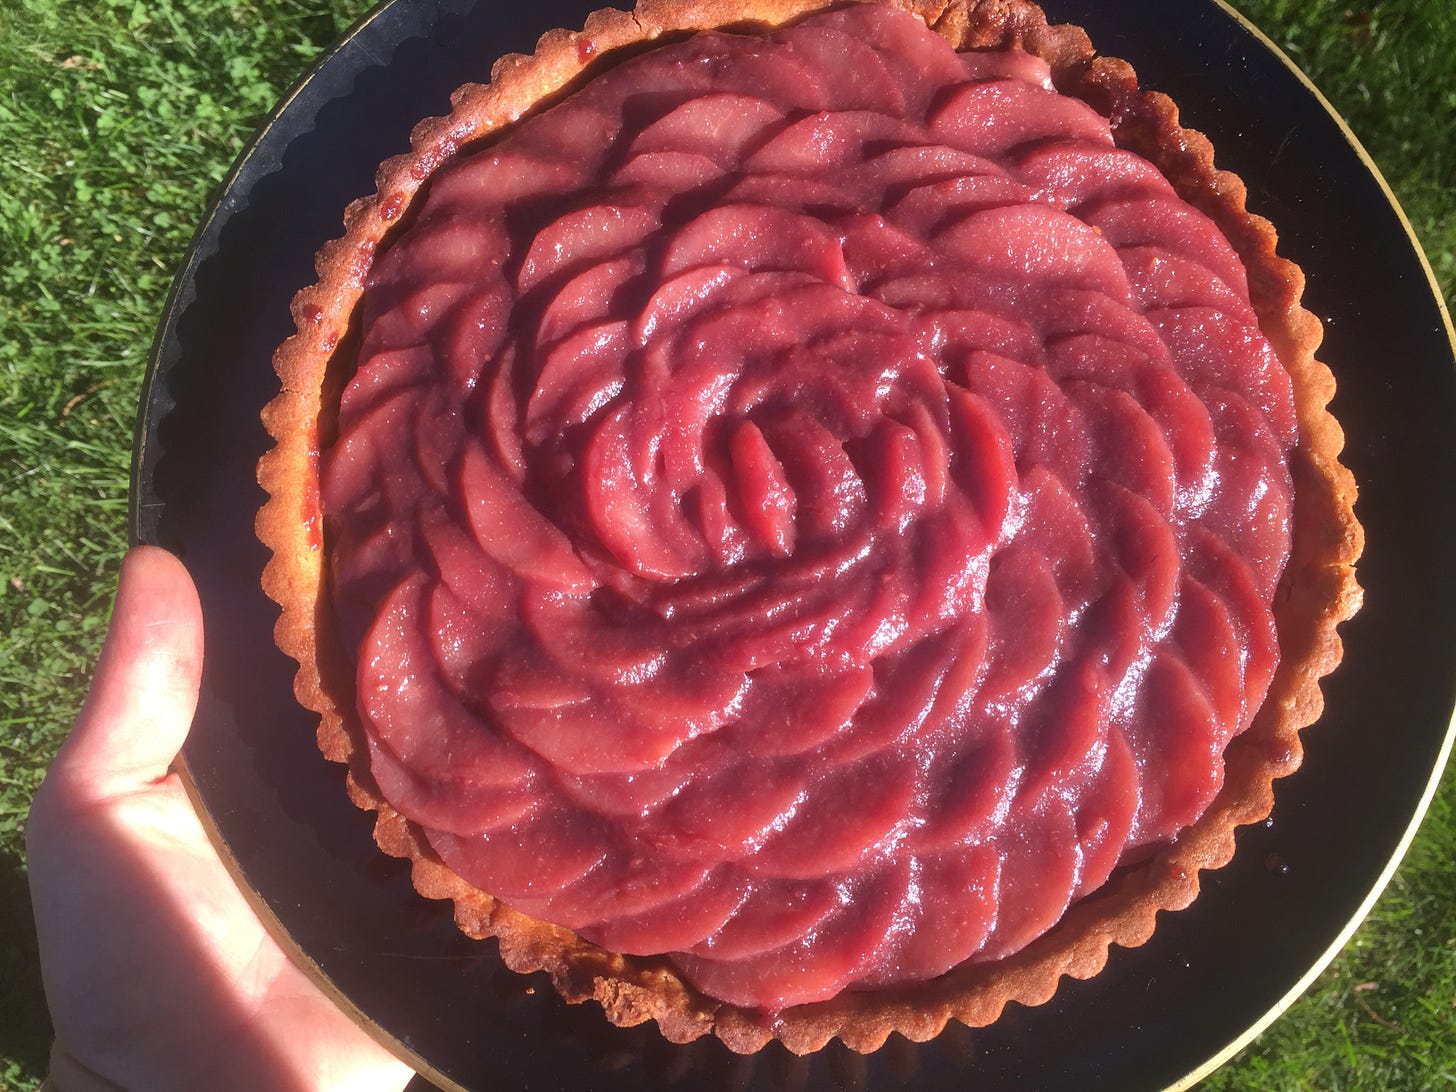 My hand holding a tart on a black platter. Deep purple pear slices are arranged in concentric, overlapping circles inside a fluted tart shell. It looks a bit like a rose.